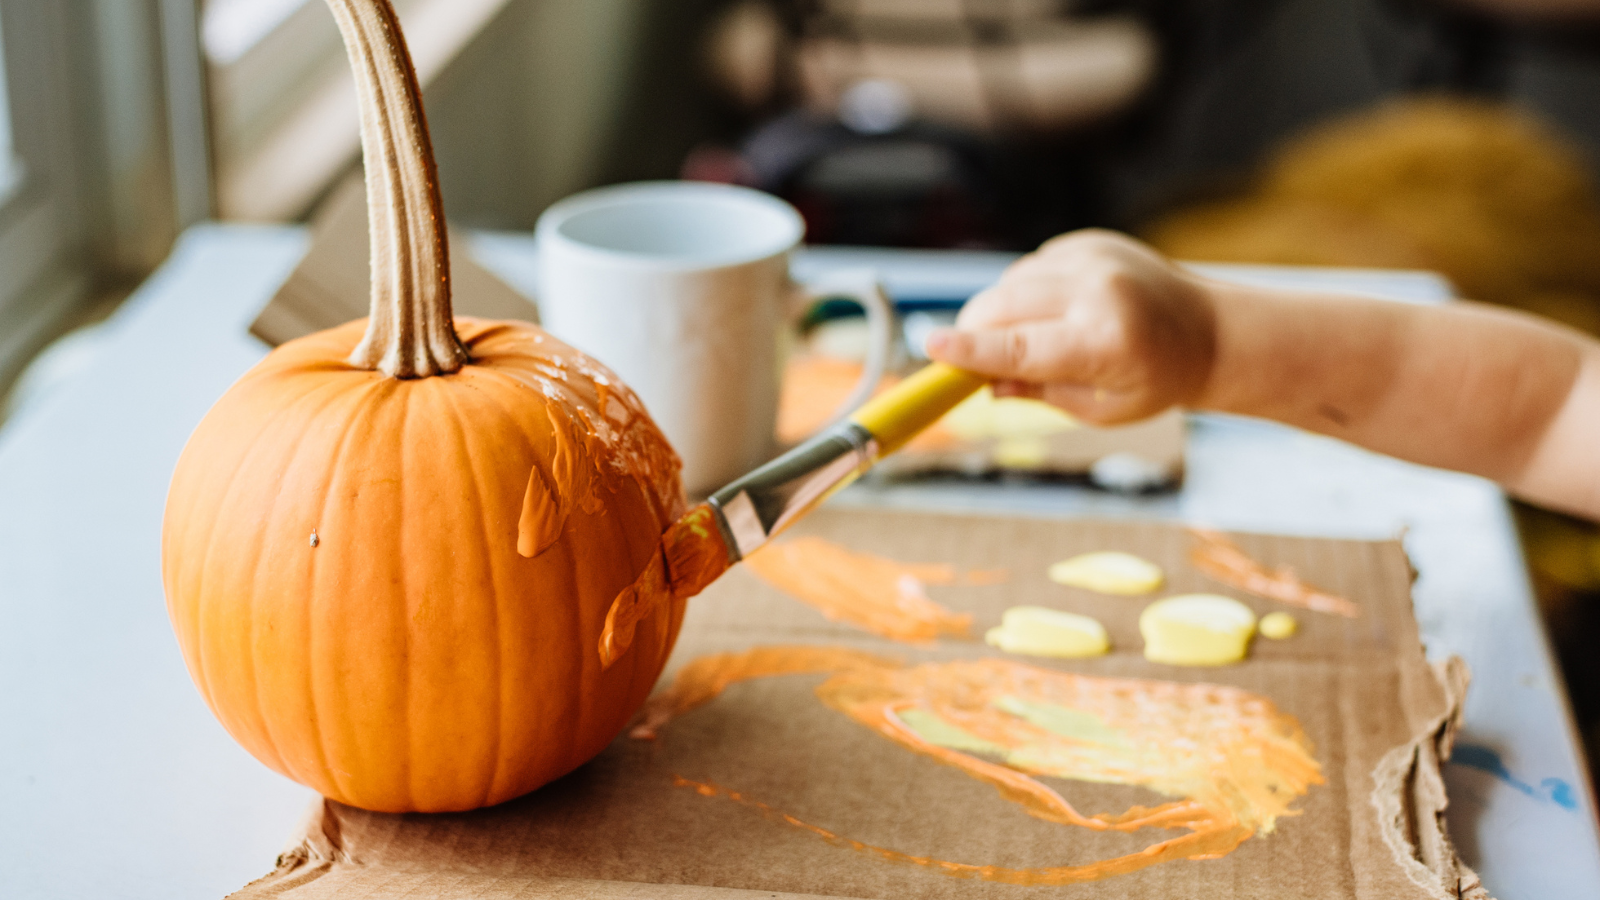 Someone painting a pumpkin.